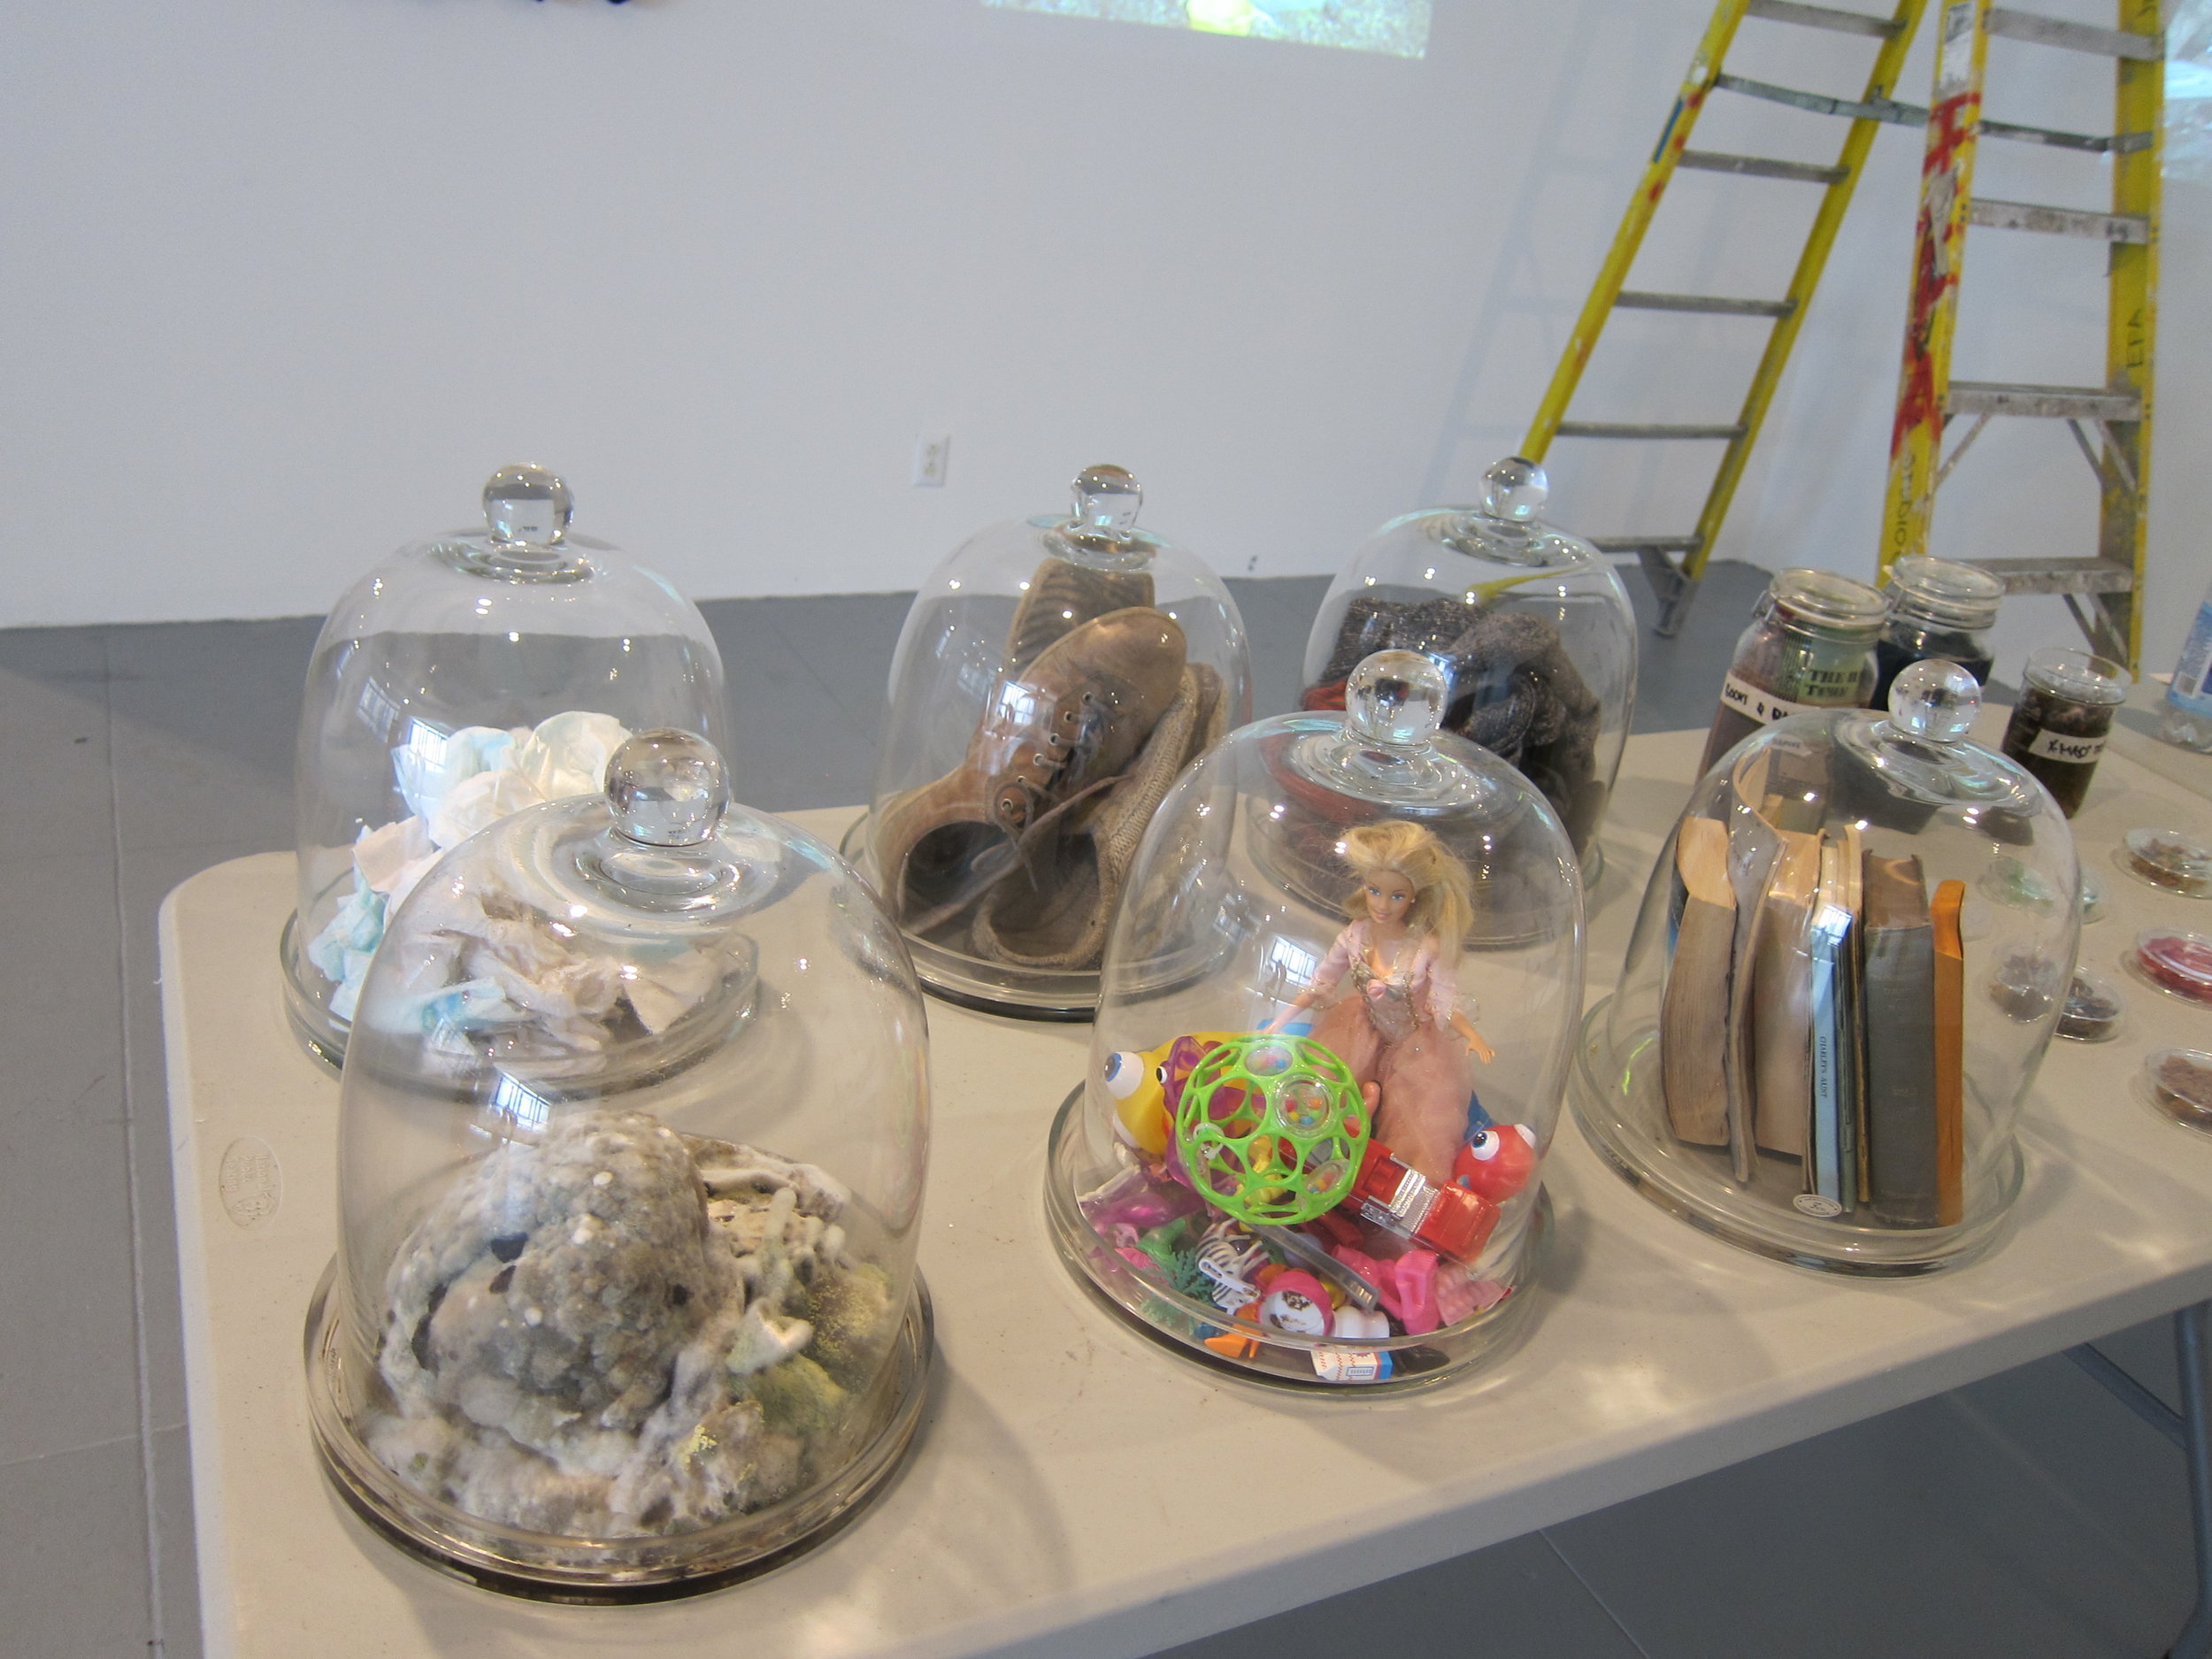   Kristyna Milde and Marek Milde,   Cabinet of Smells,  2014-15. Installation of perfume bottles and cleaning supplies and distillation station. Dimensions variable. 